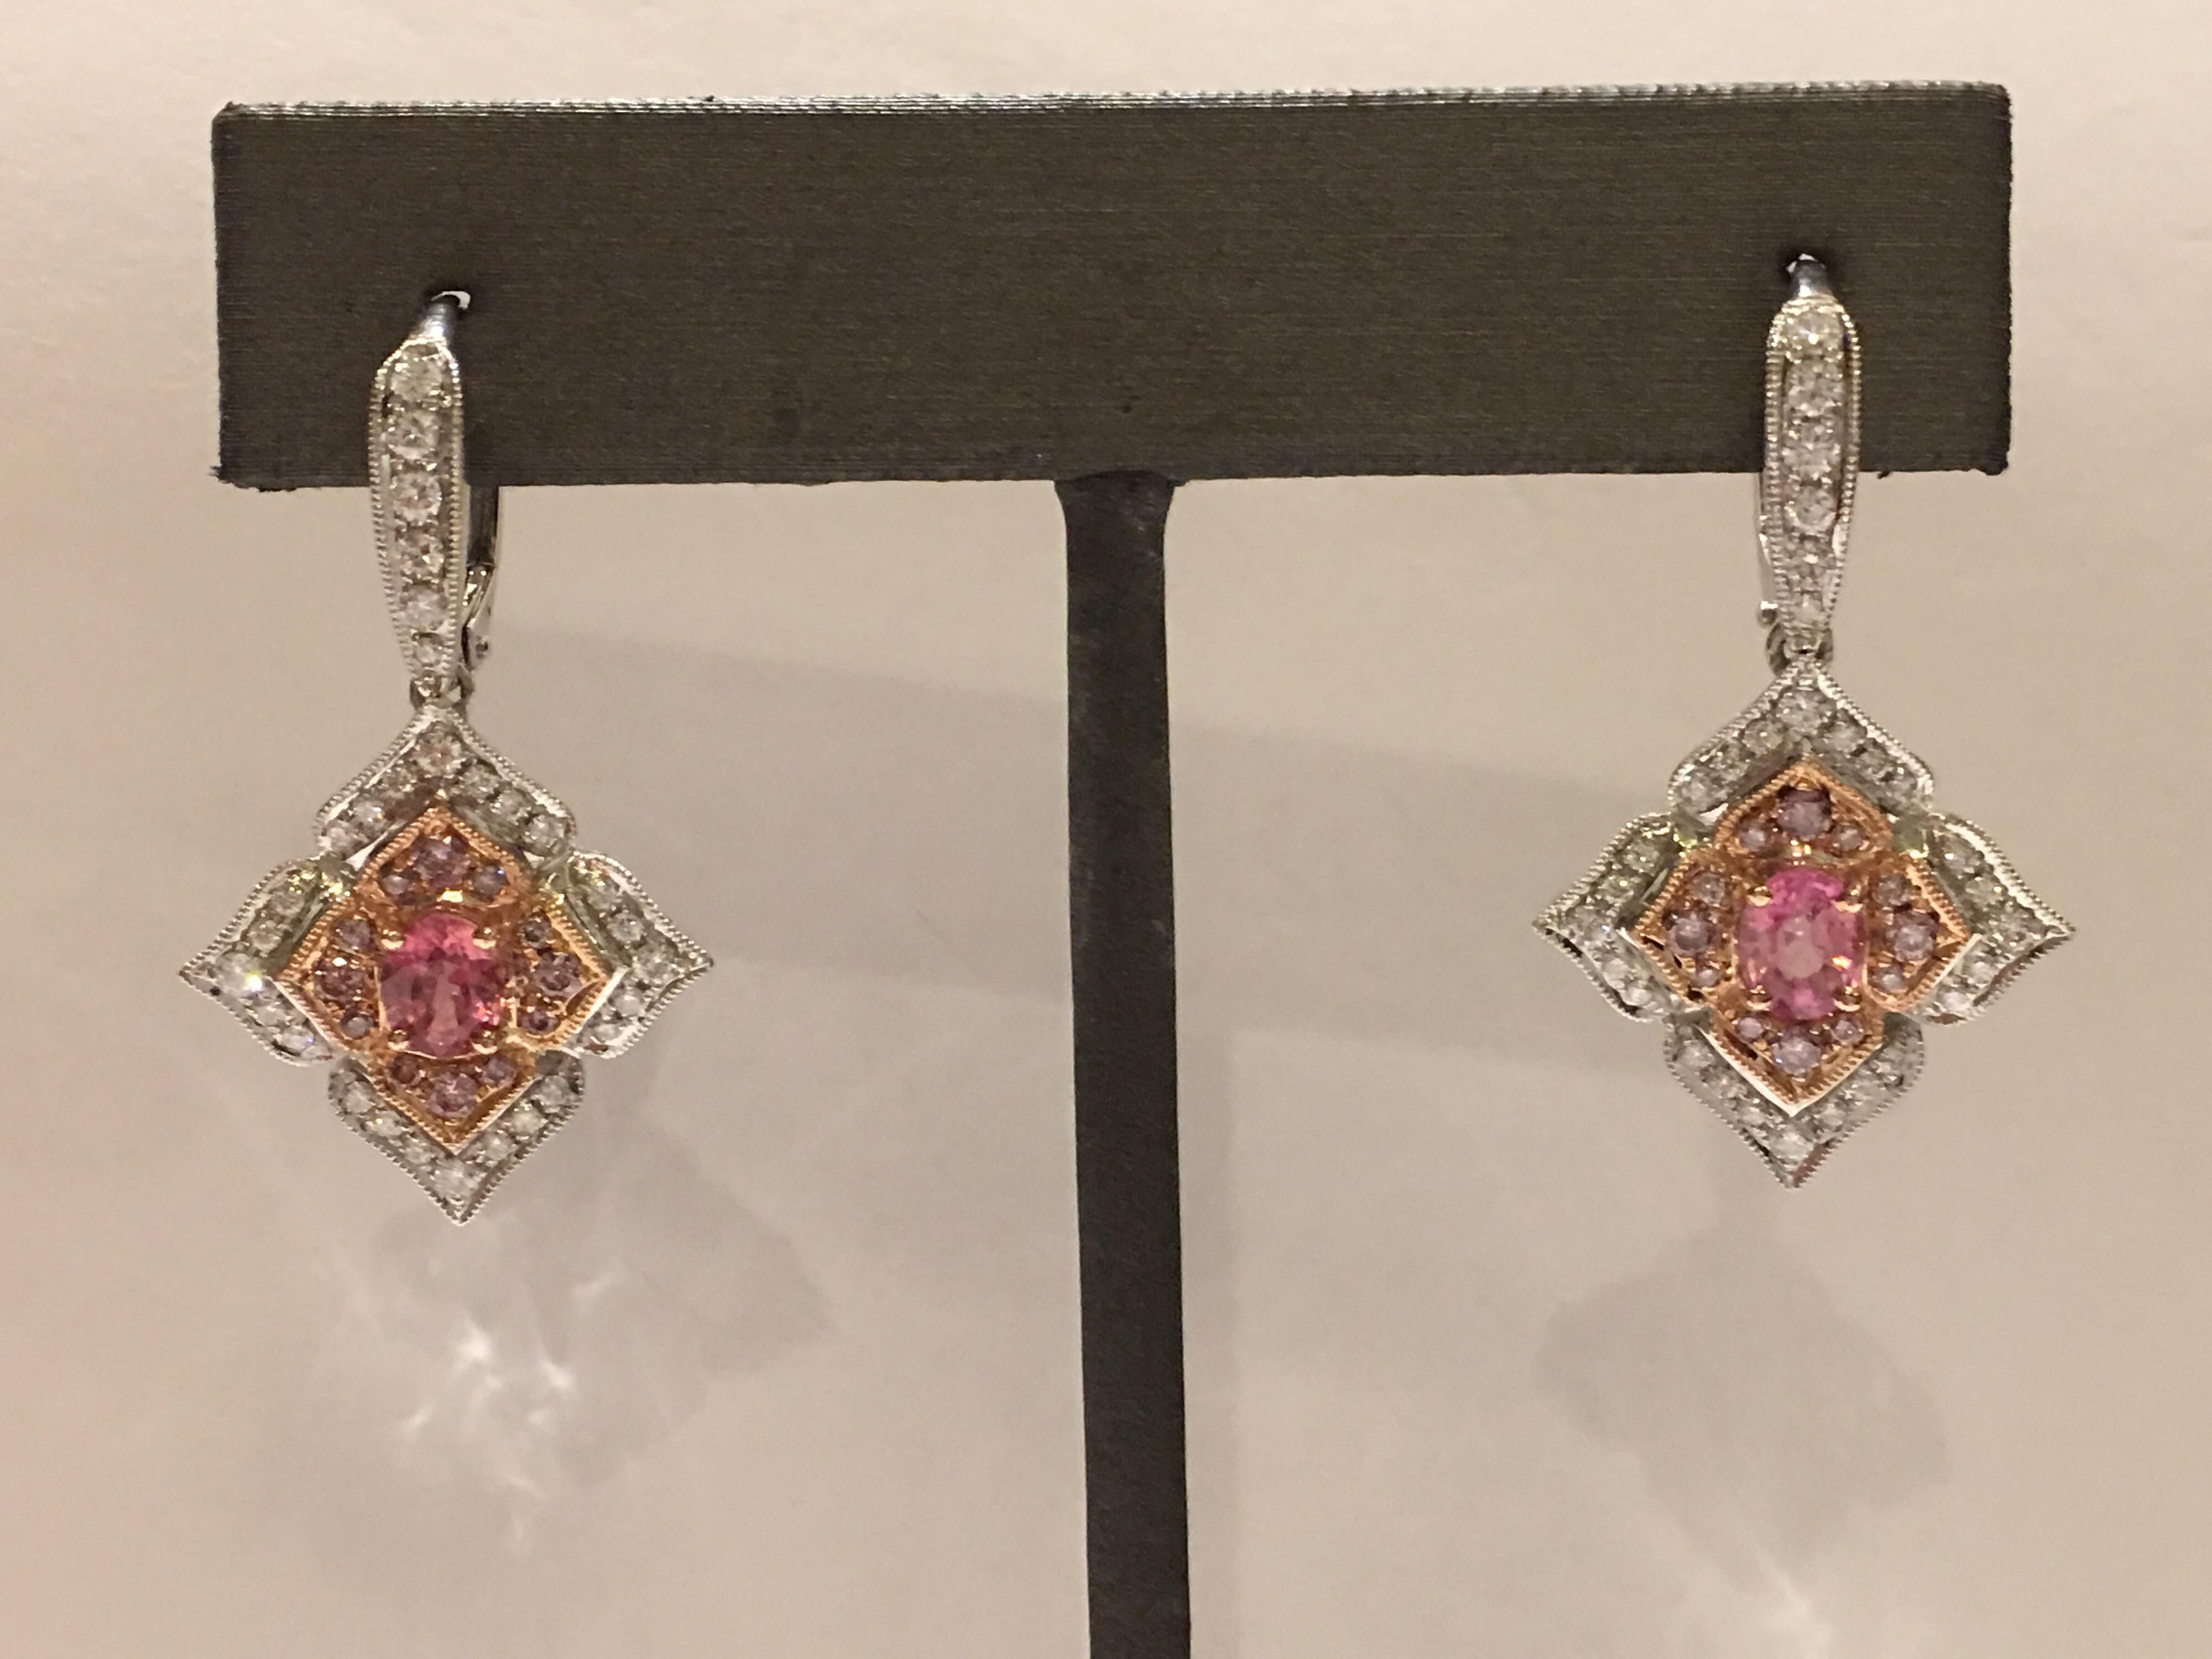 Padparadscha Sapphire with Pink and white Diamond is one of a kind Earring set in 14K Two Tone Gold.
The Padparadscha Total weight is 0.75 Carat , Pink Diamond is 0.33 Carat and White Round Diamond is 0.66 Carat,
Total Diamond and Sapphire weight is